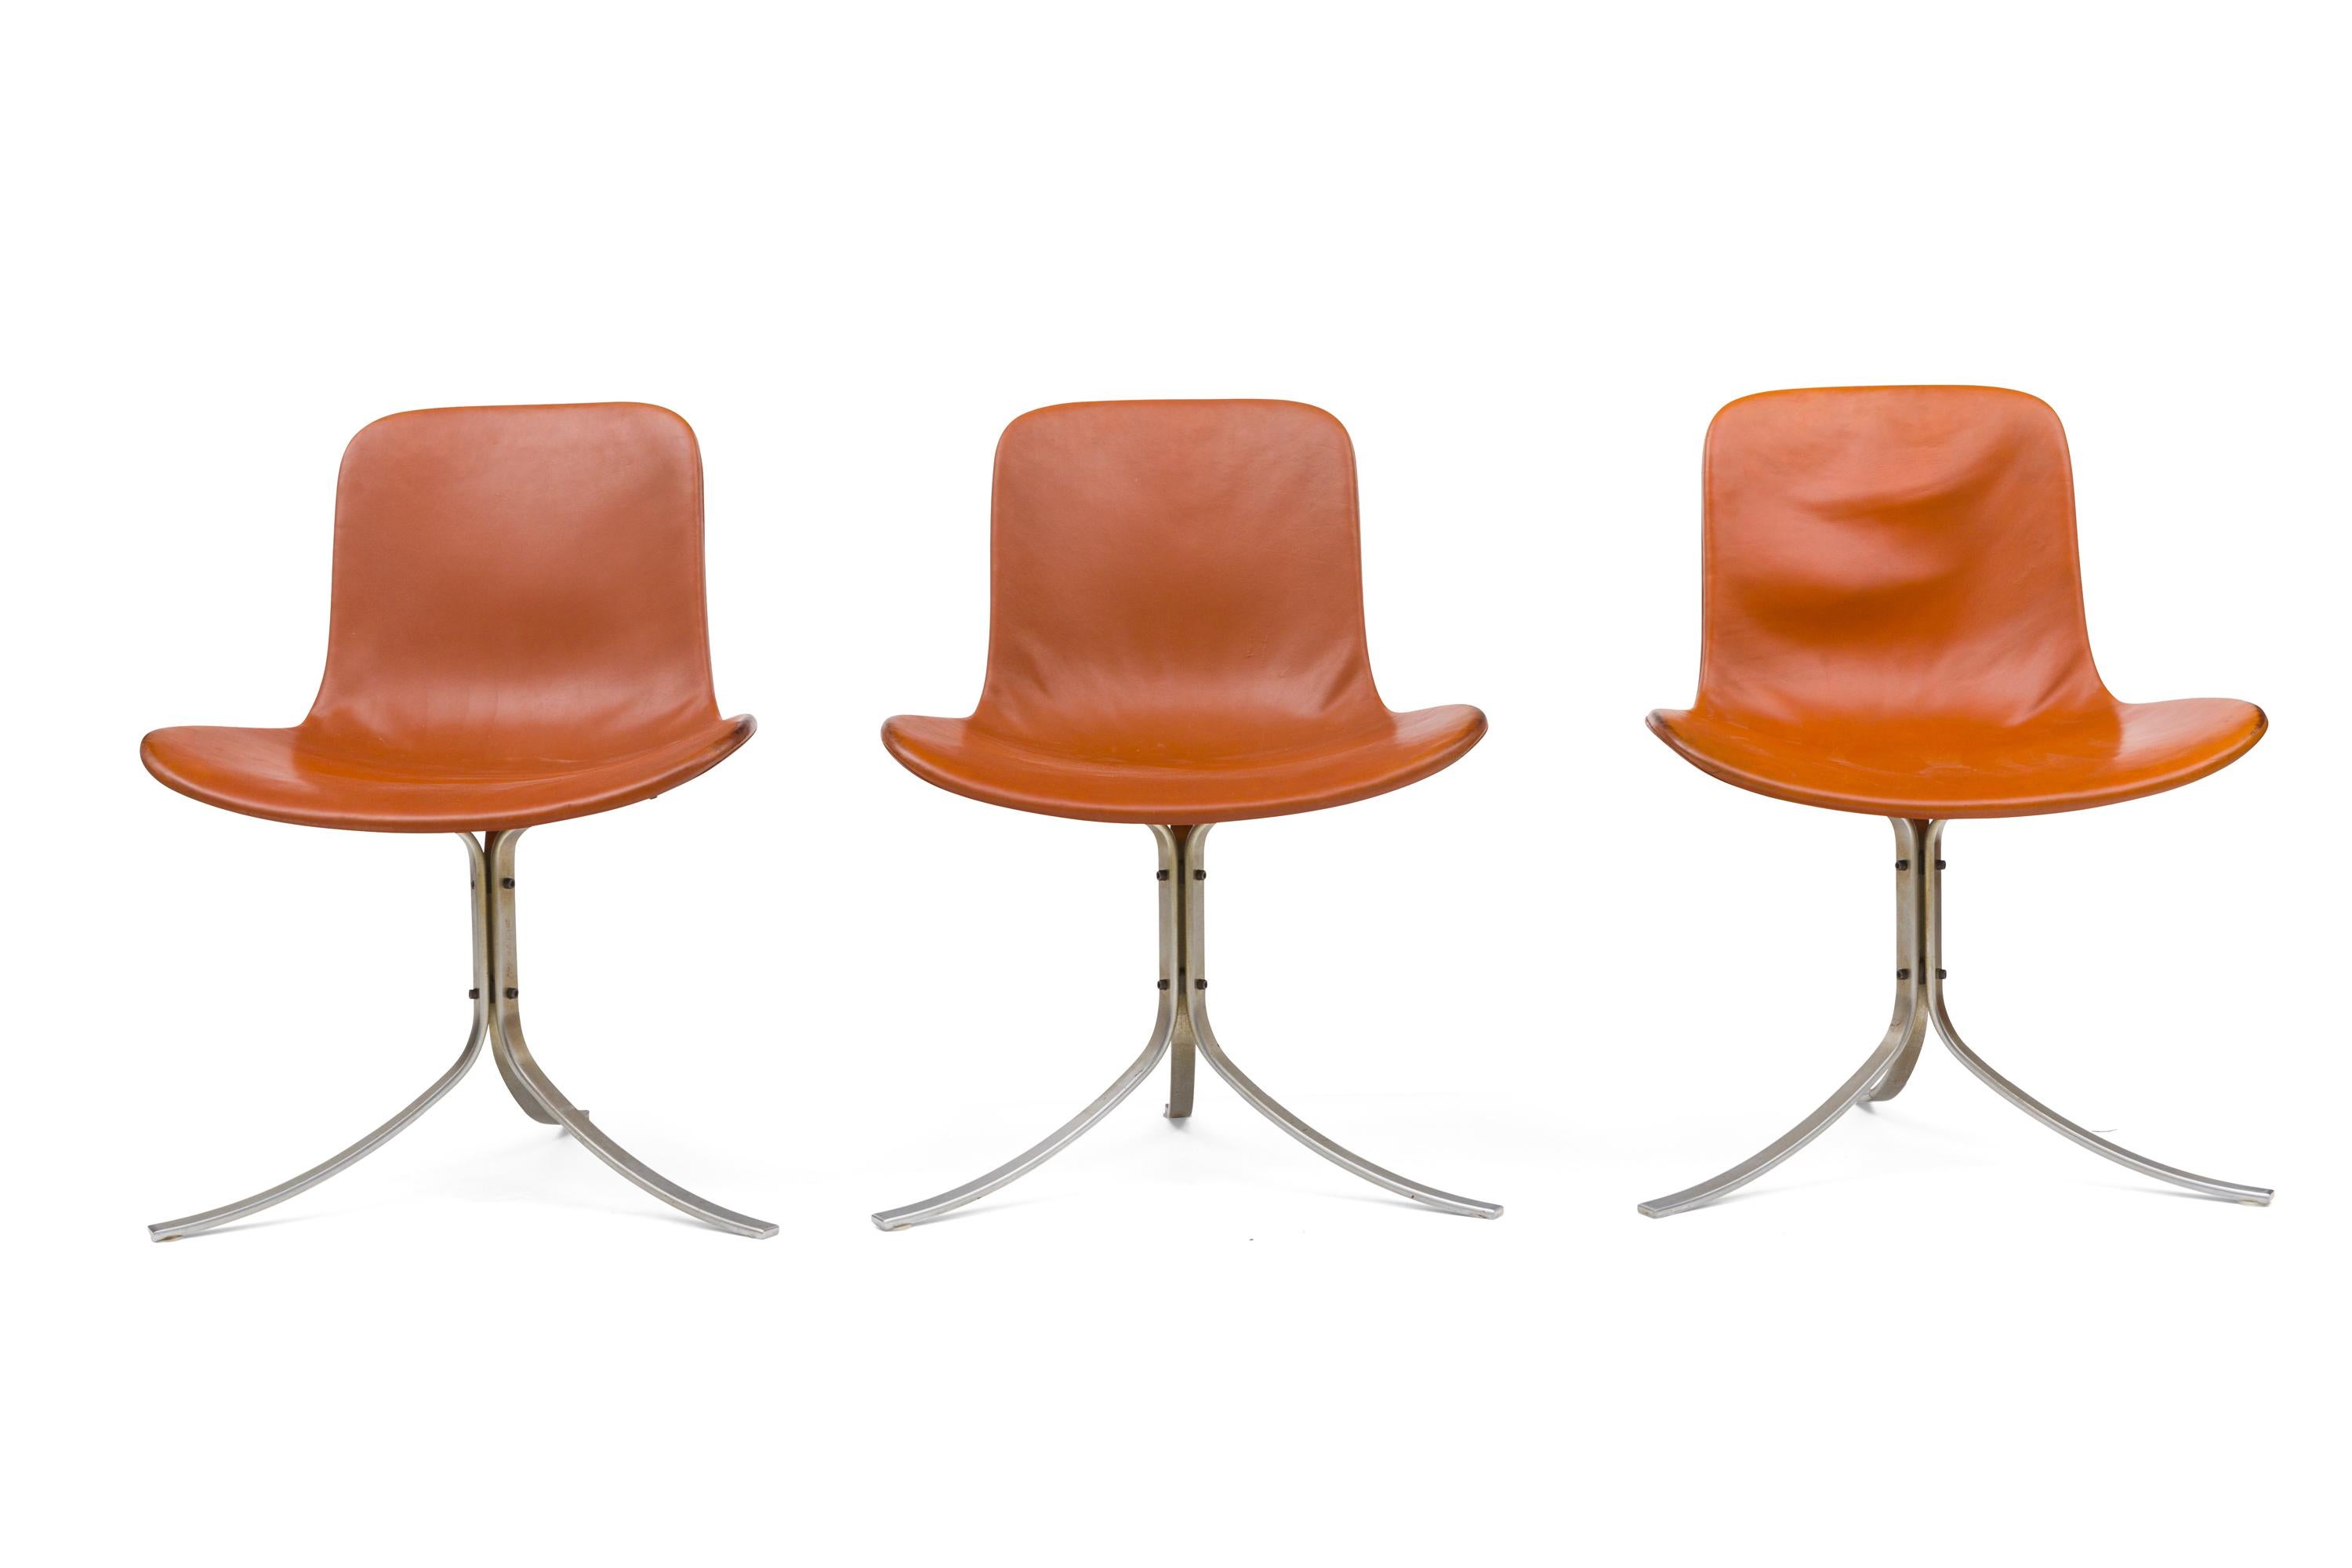 A set of six PK 9 chairs with a wonderful patina, upholstered in brown leather with chromed steel frames. Marked with E. Kold Christensen's logo.